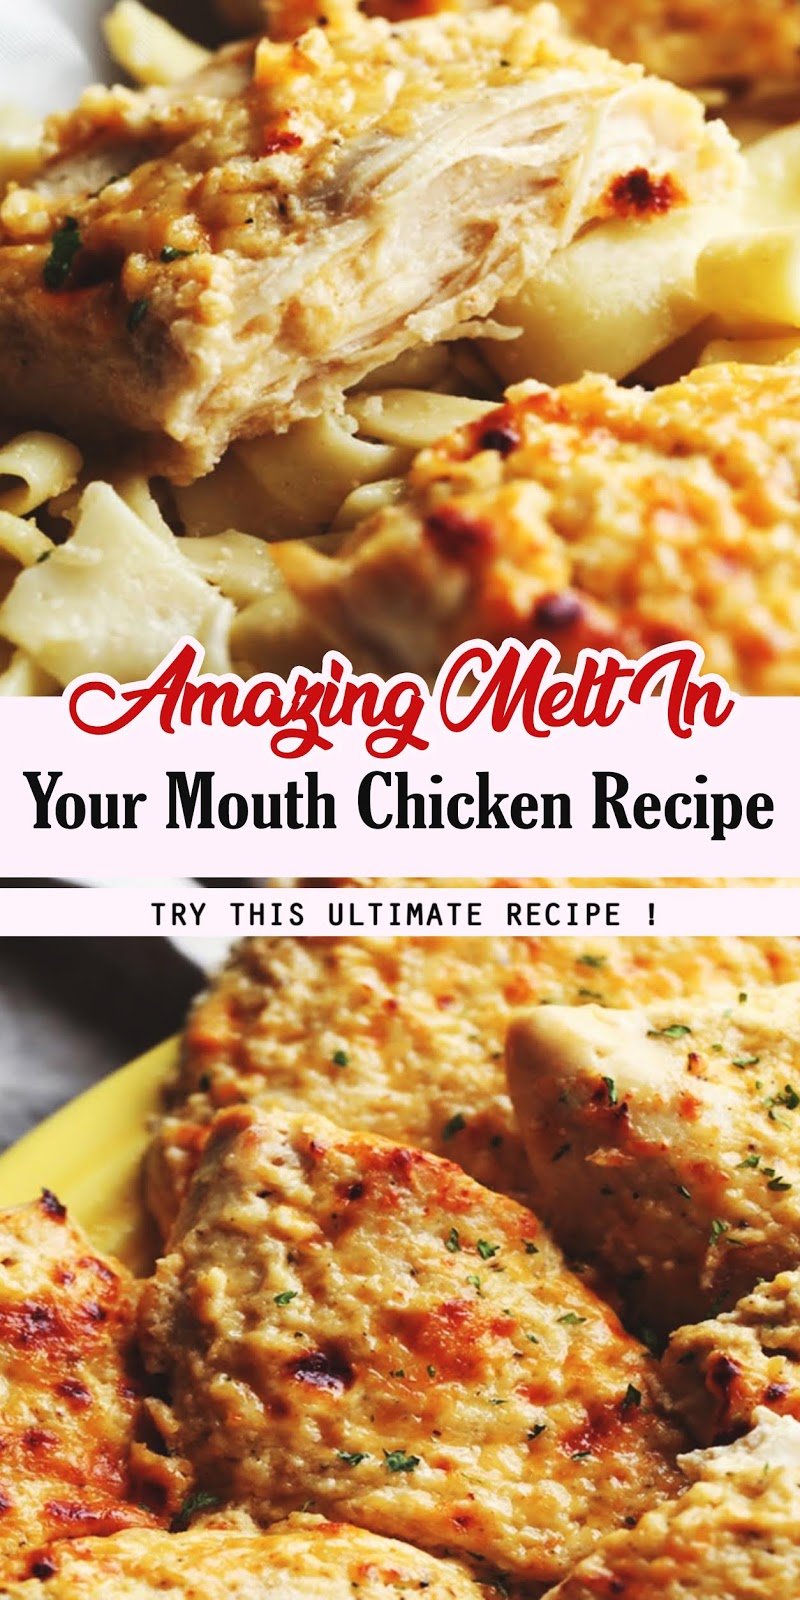 Amazing Melt In Your Mouth Chicken Recipe - 3 SECONDS